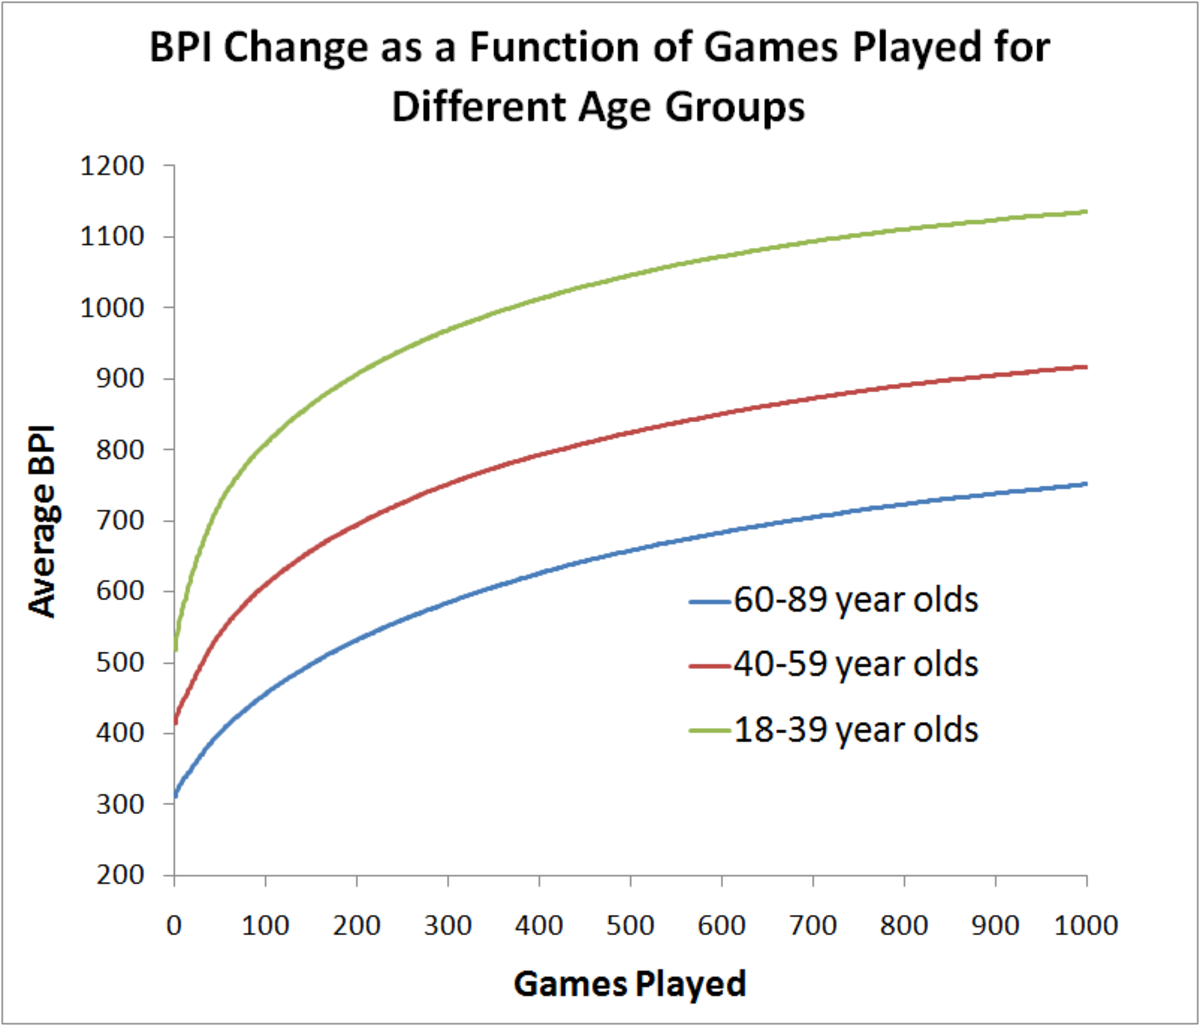 BPI Change as a Function of Games Played for Different Age Groups